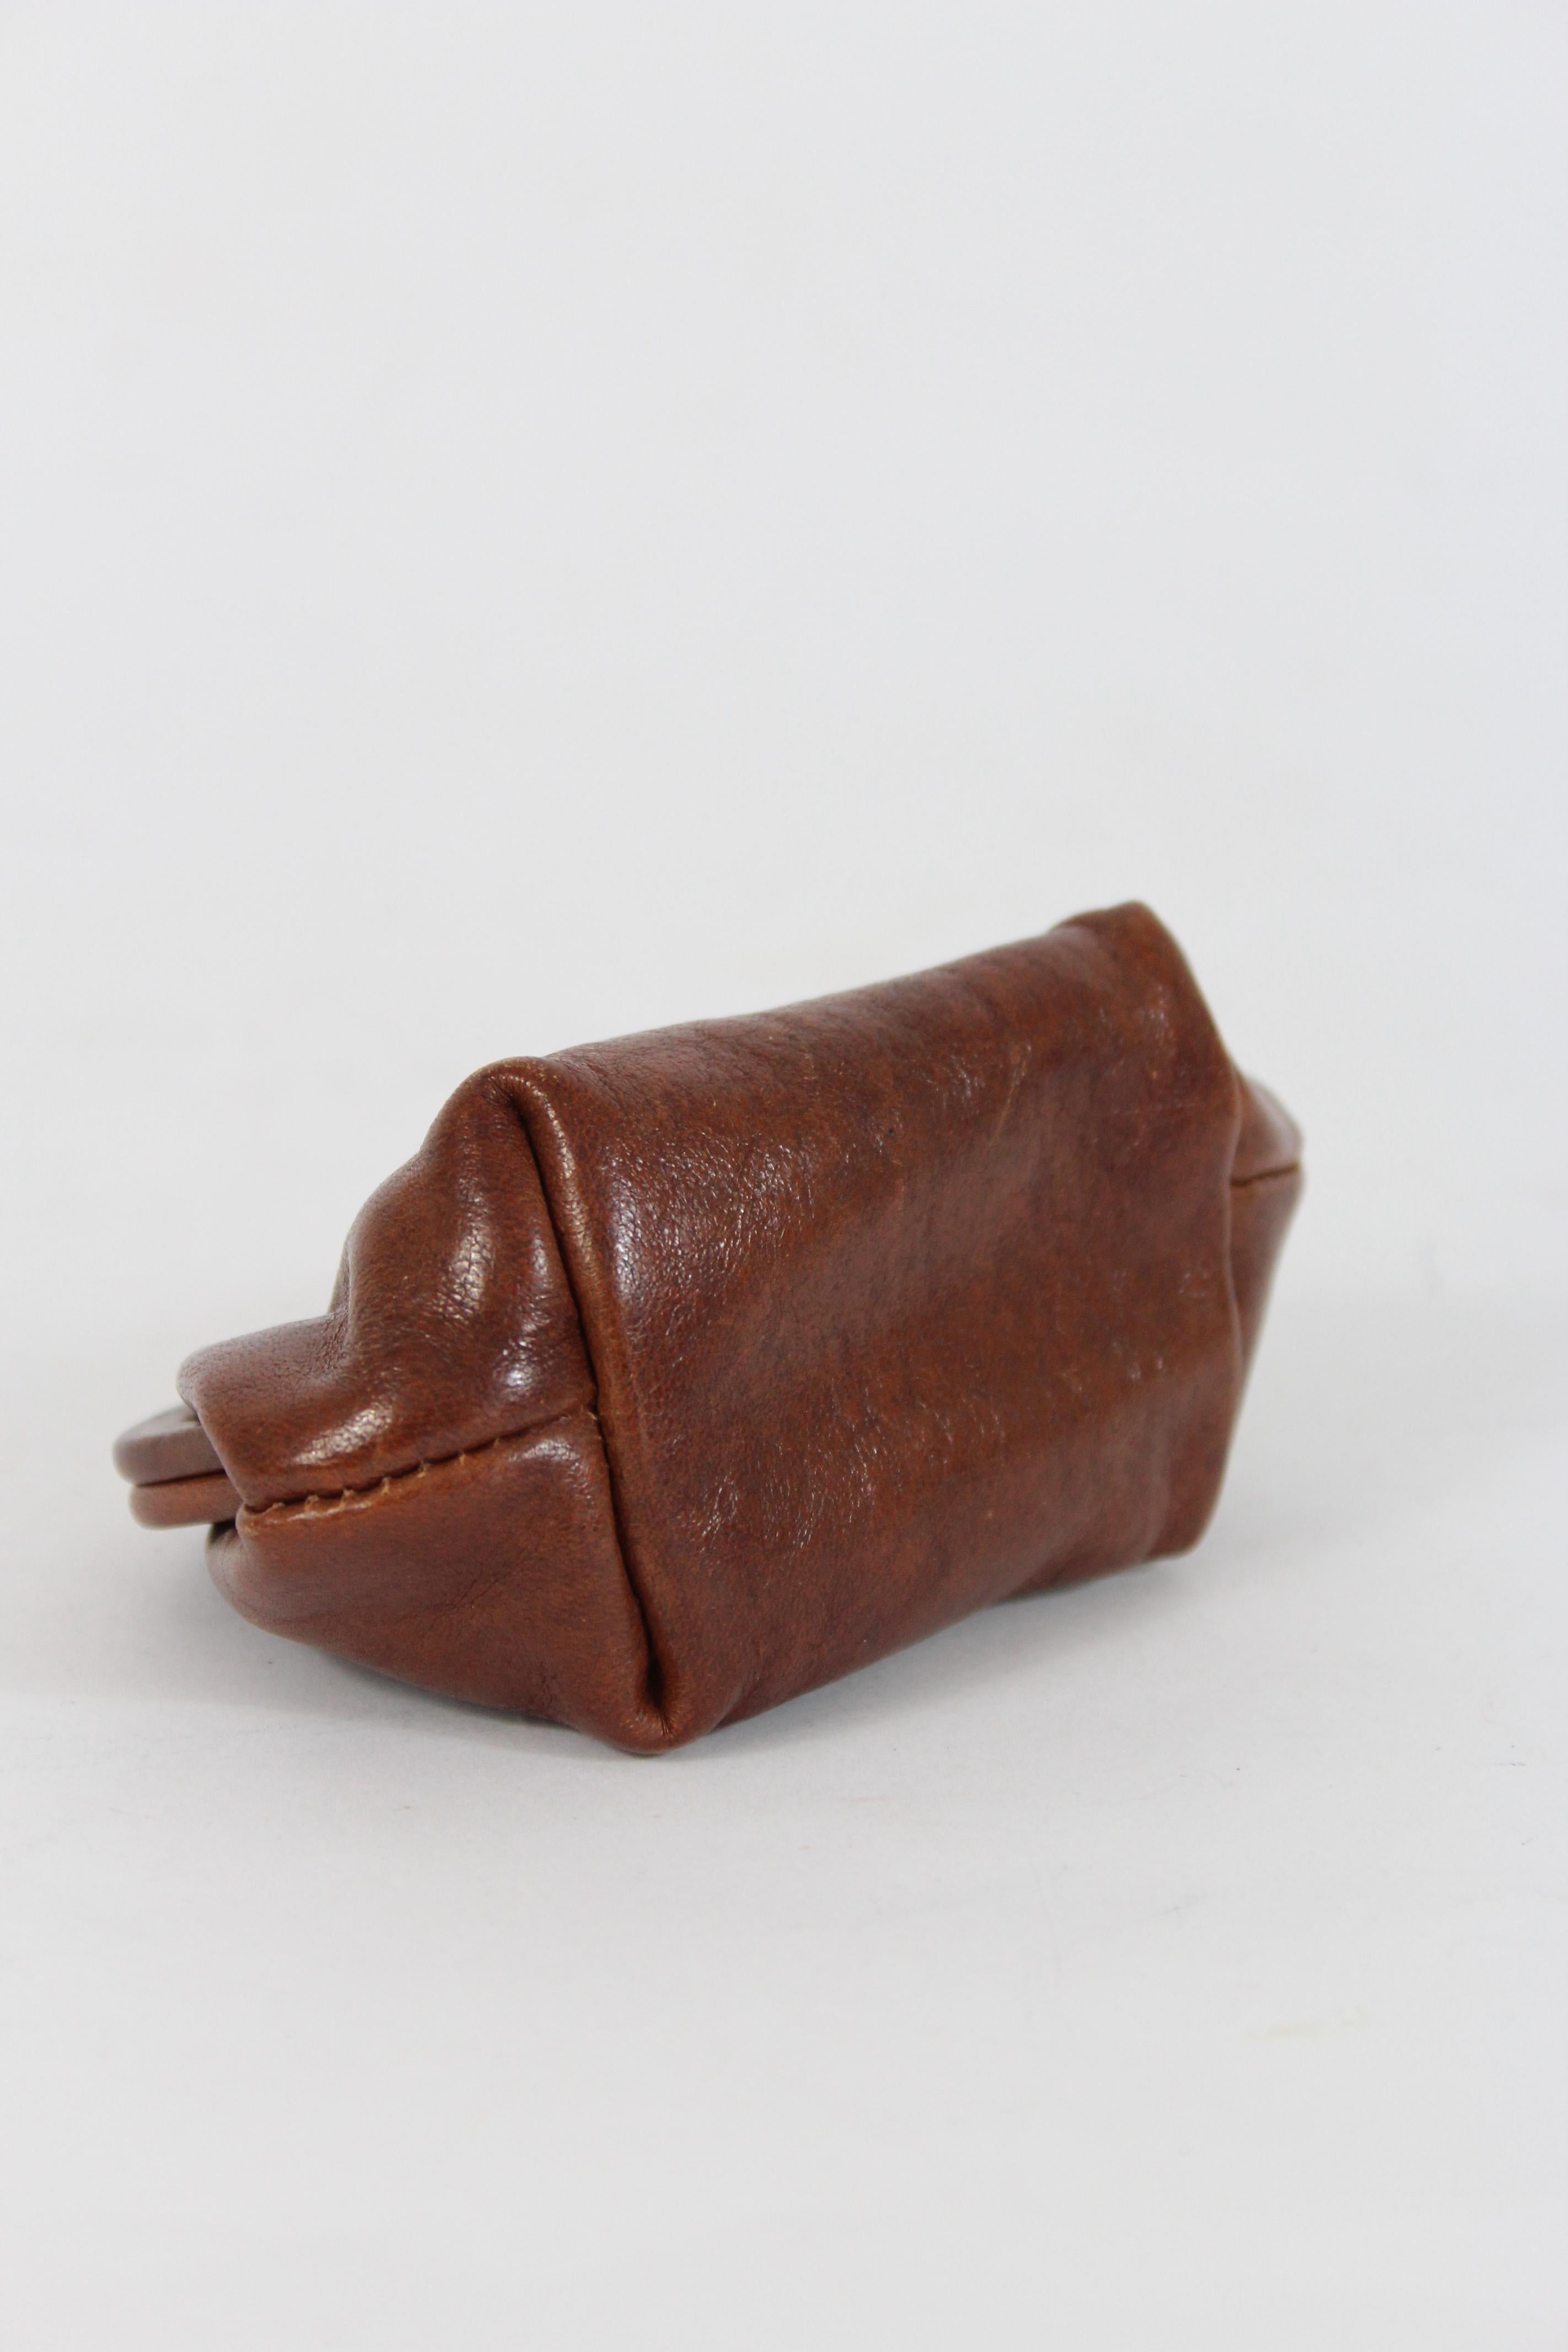 The Bridge Brown Leather Coin Purse In Excellent Condition In Brindisi, Bt